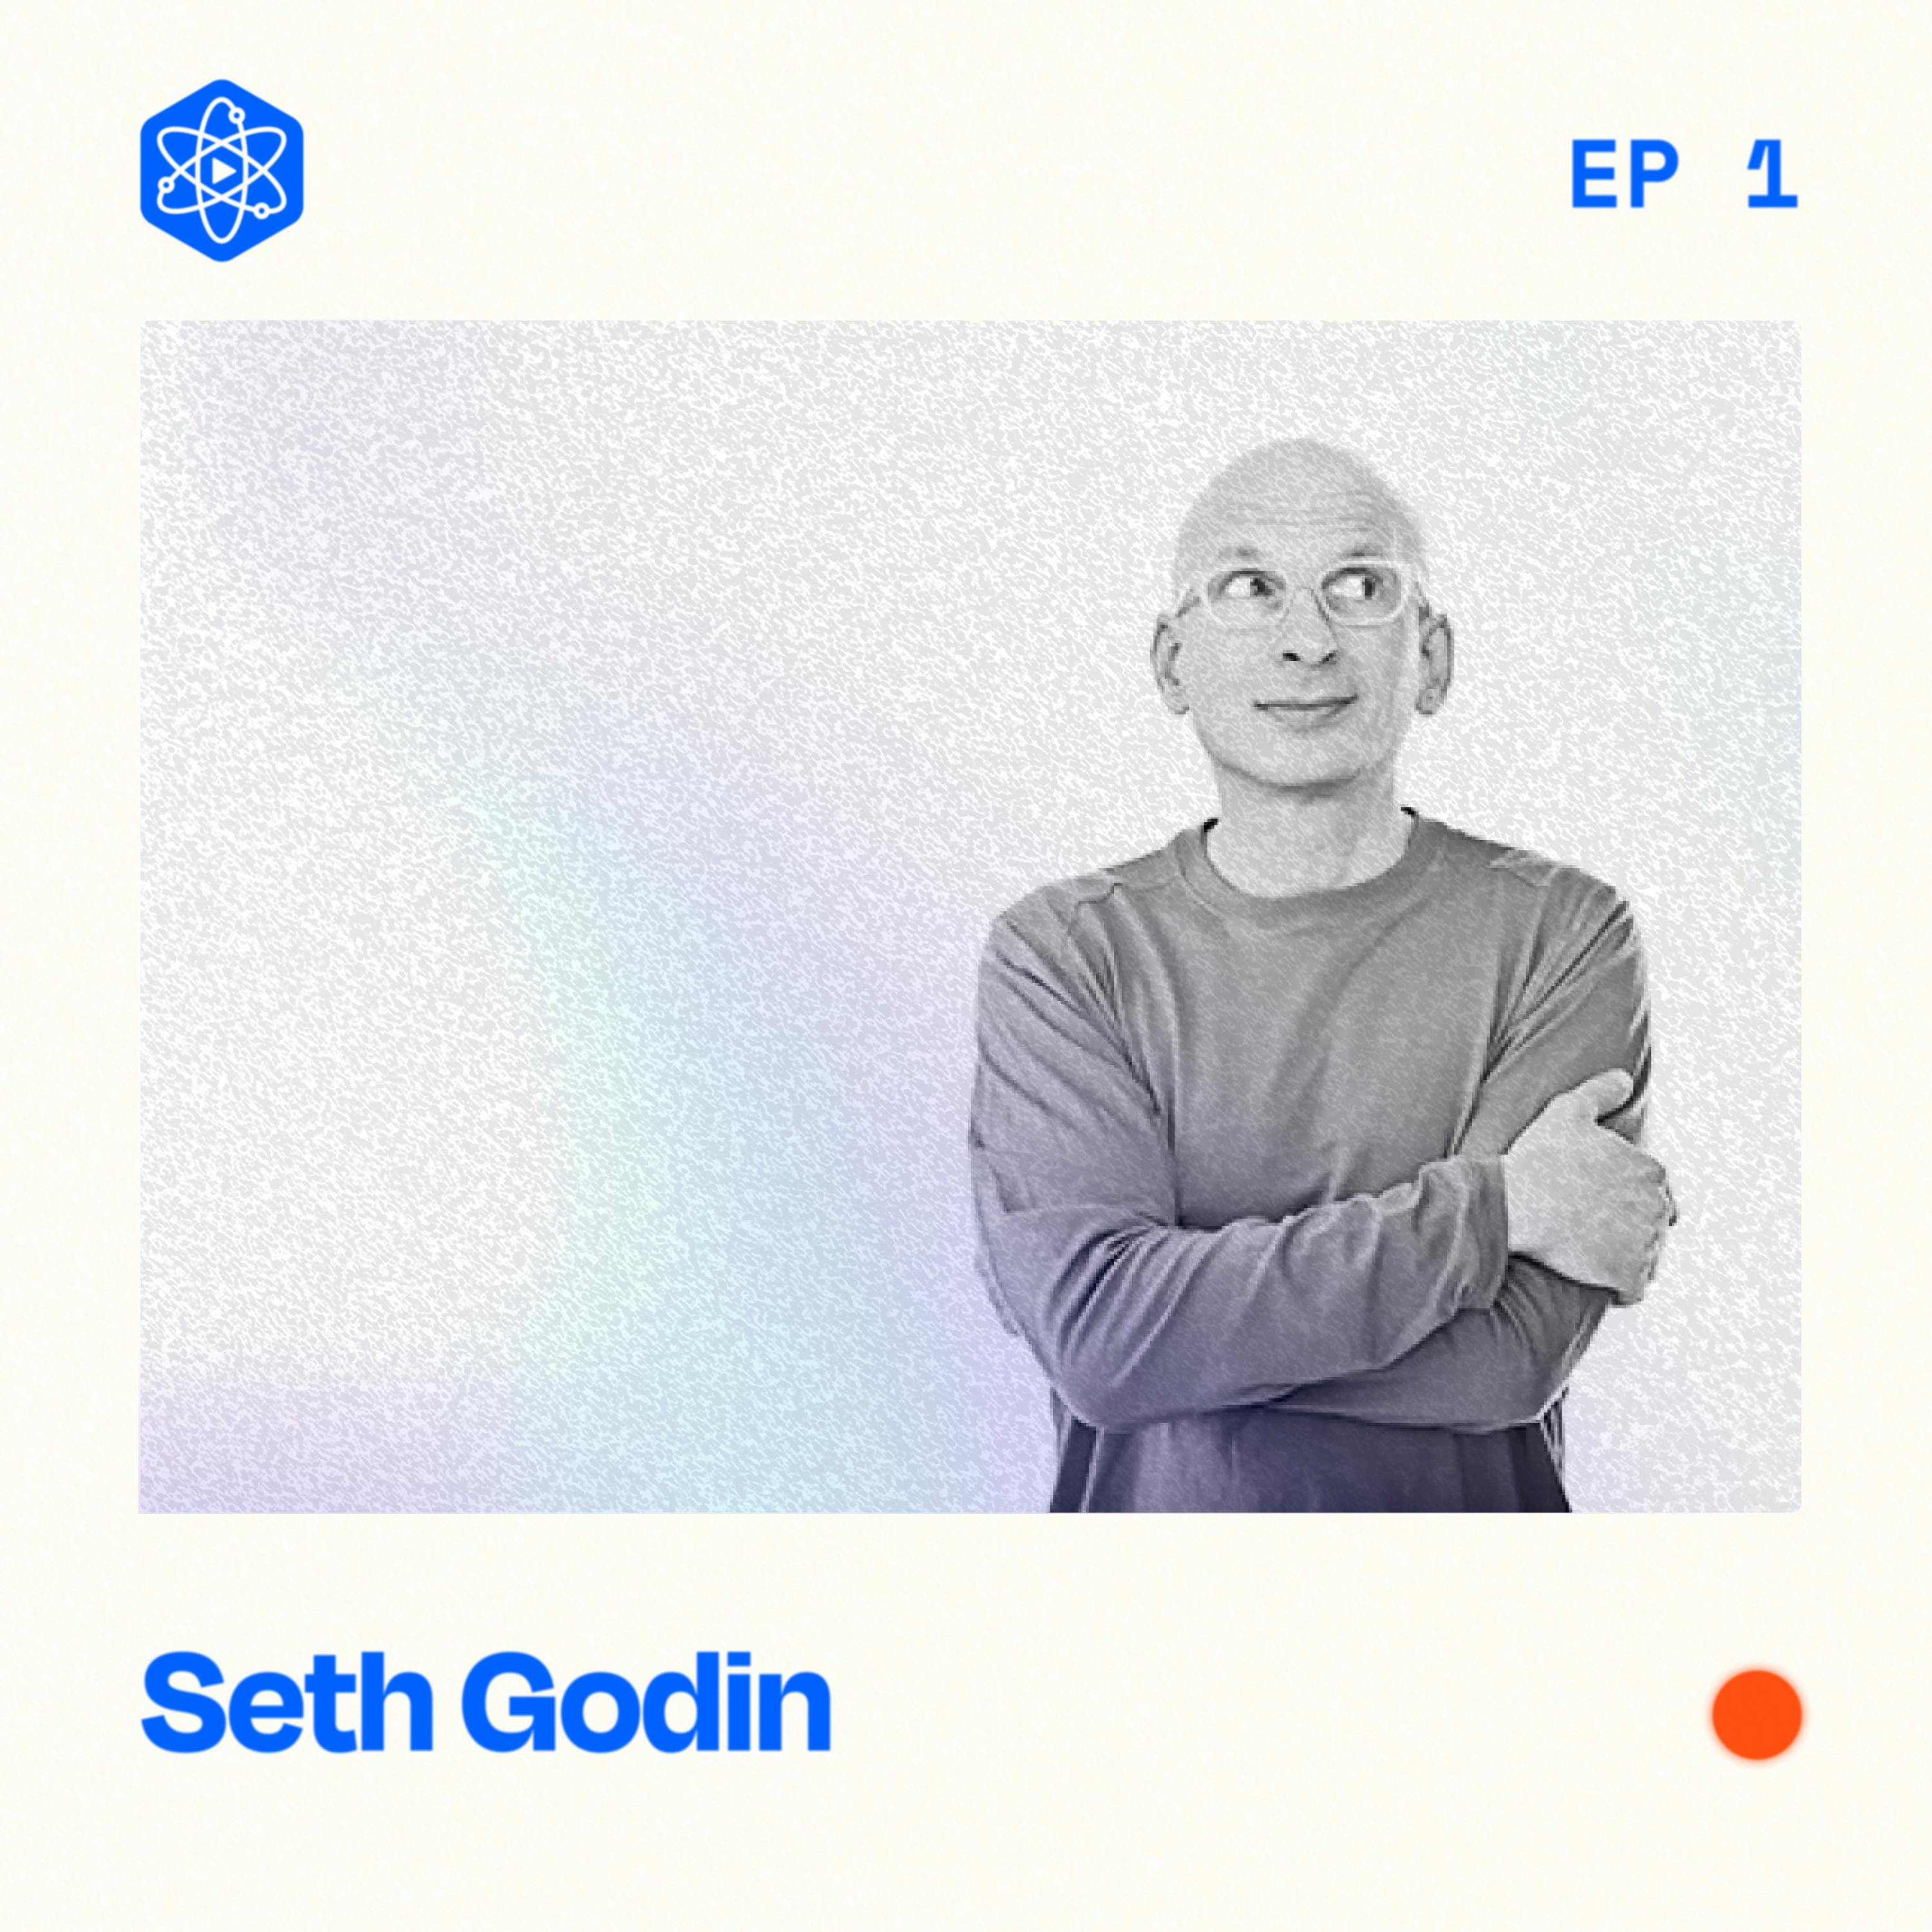 Seth Godin – Art, freelancing, building a personal brand, and the problem with being authentic